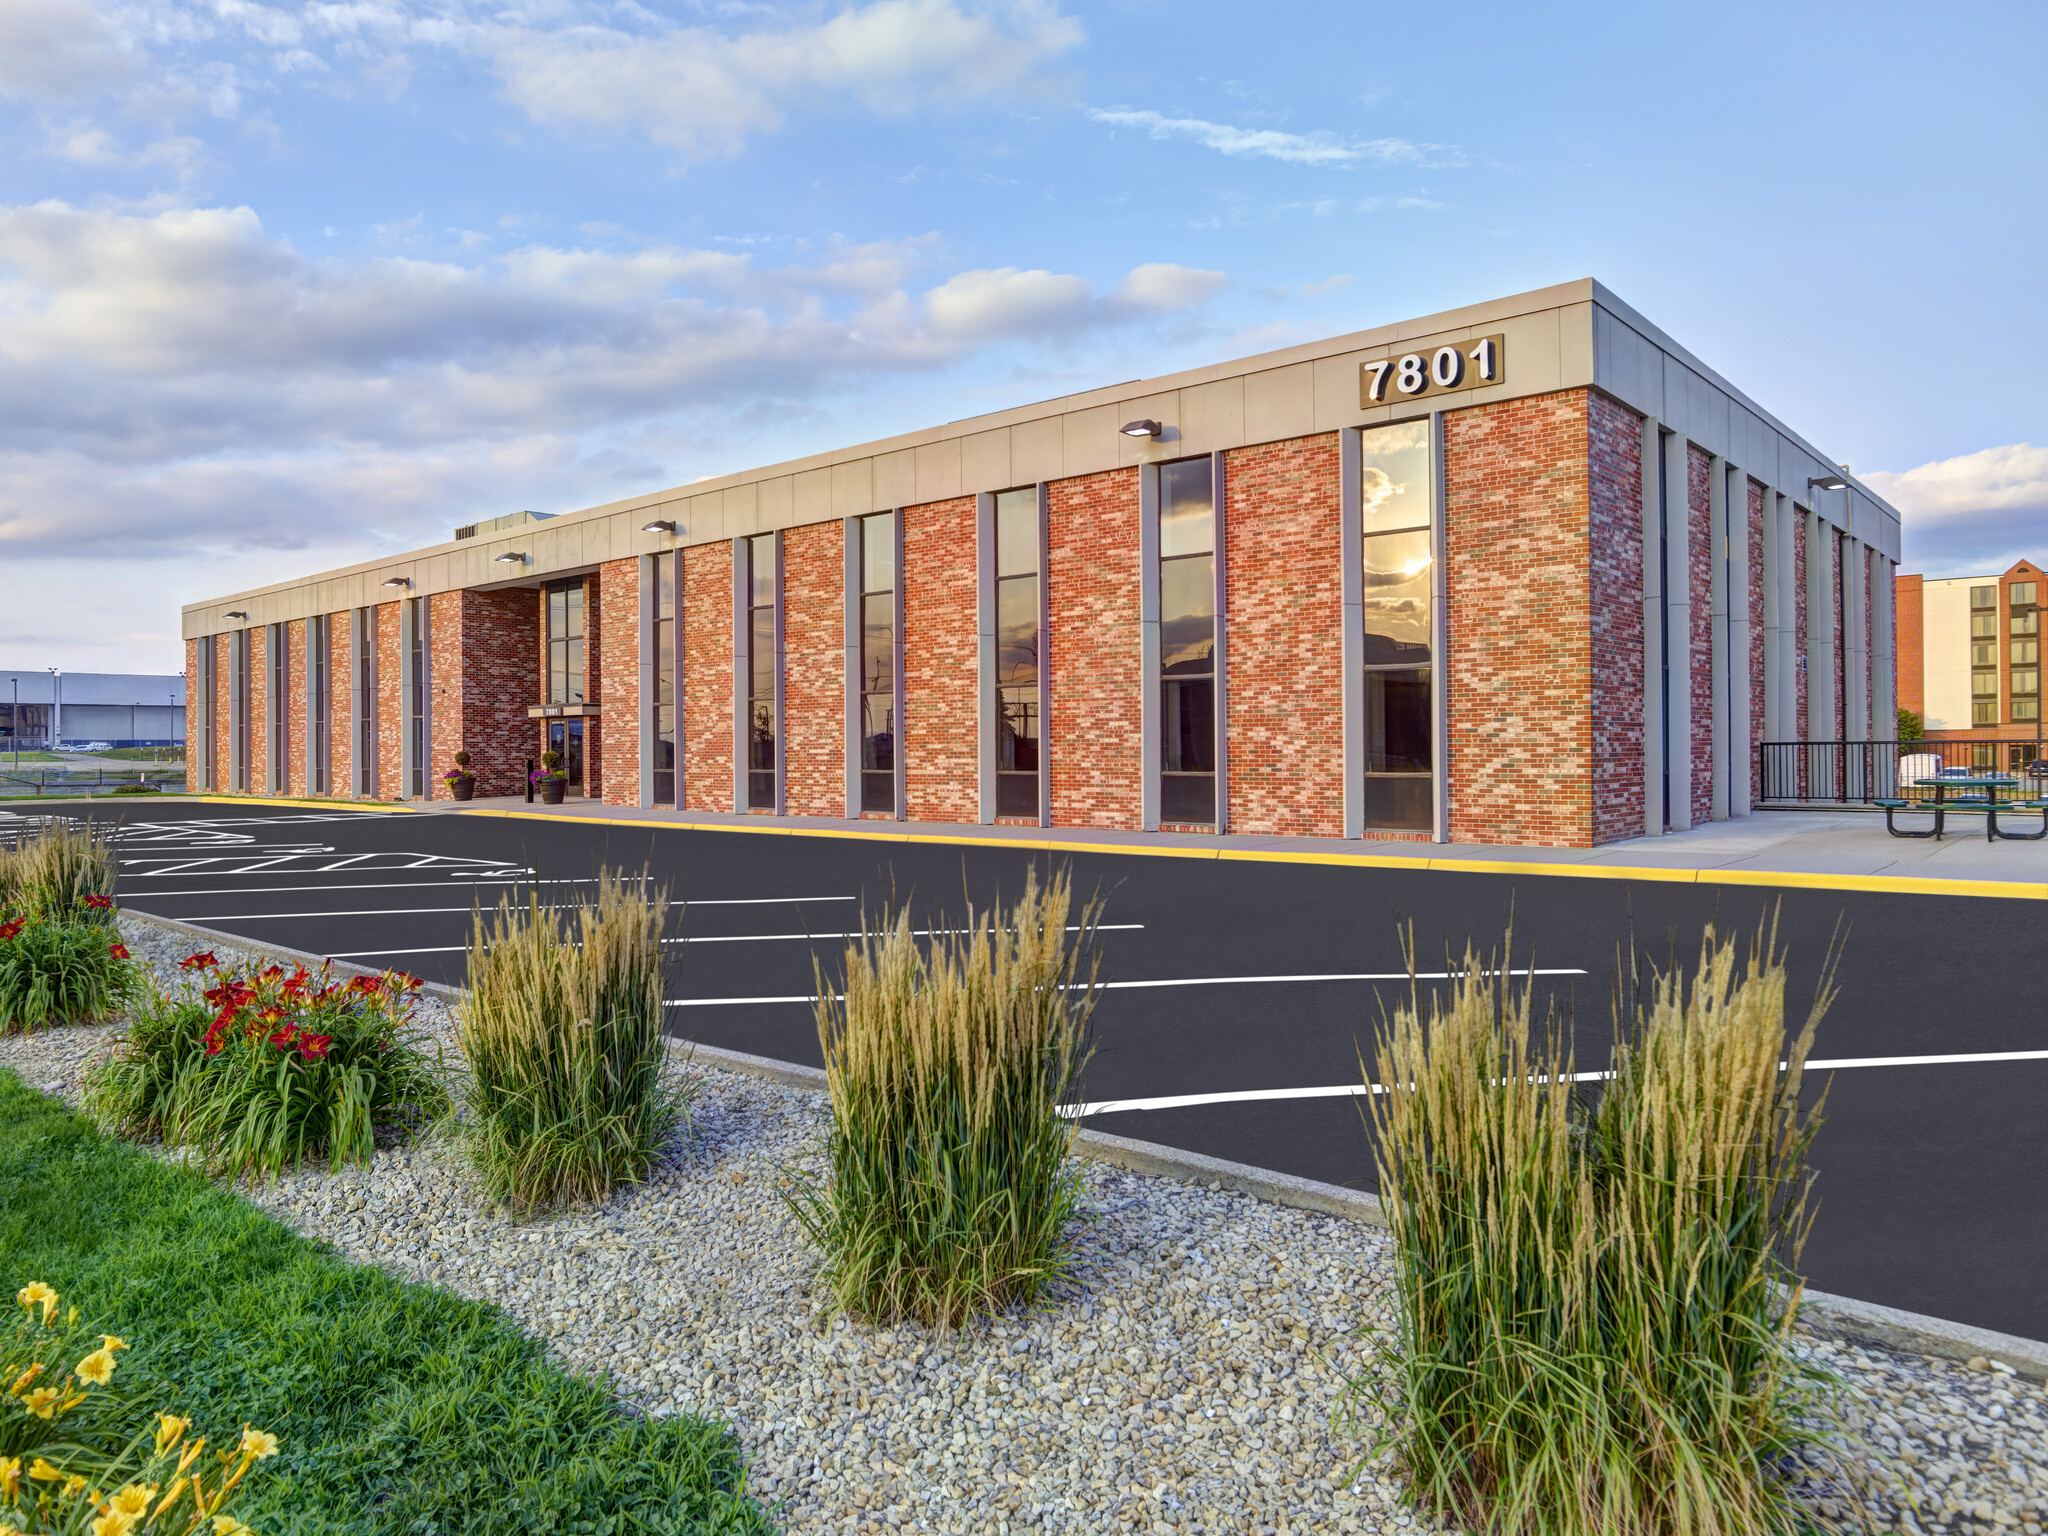 Bloomington office space, For lease, Minnesota's commercial hub, USD per sq ft, 2050x1540 HD Desktop